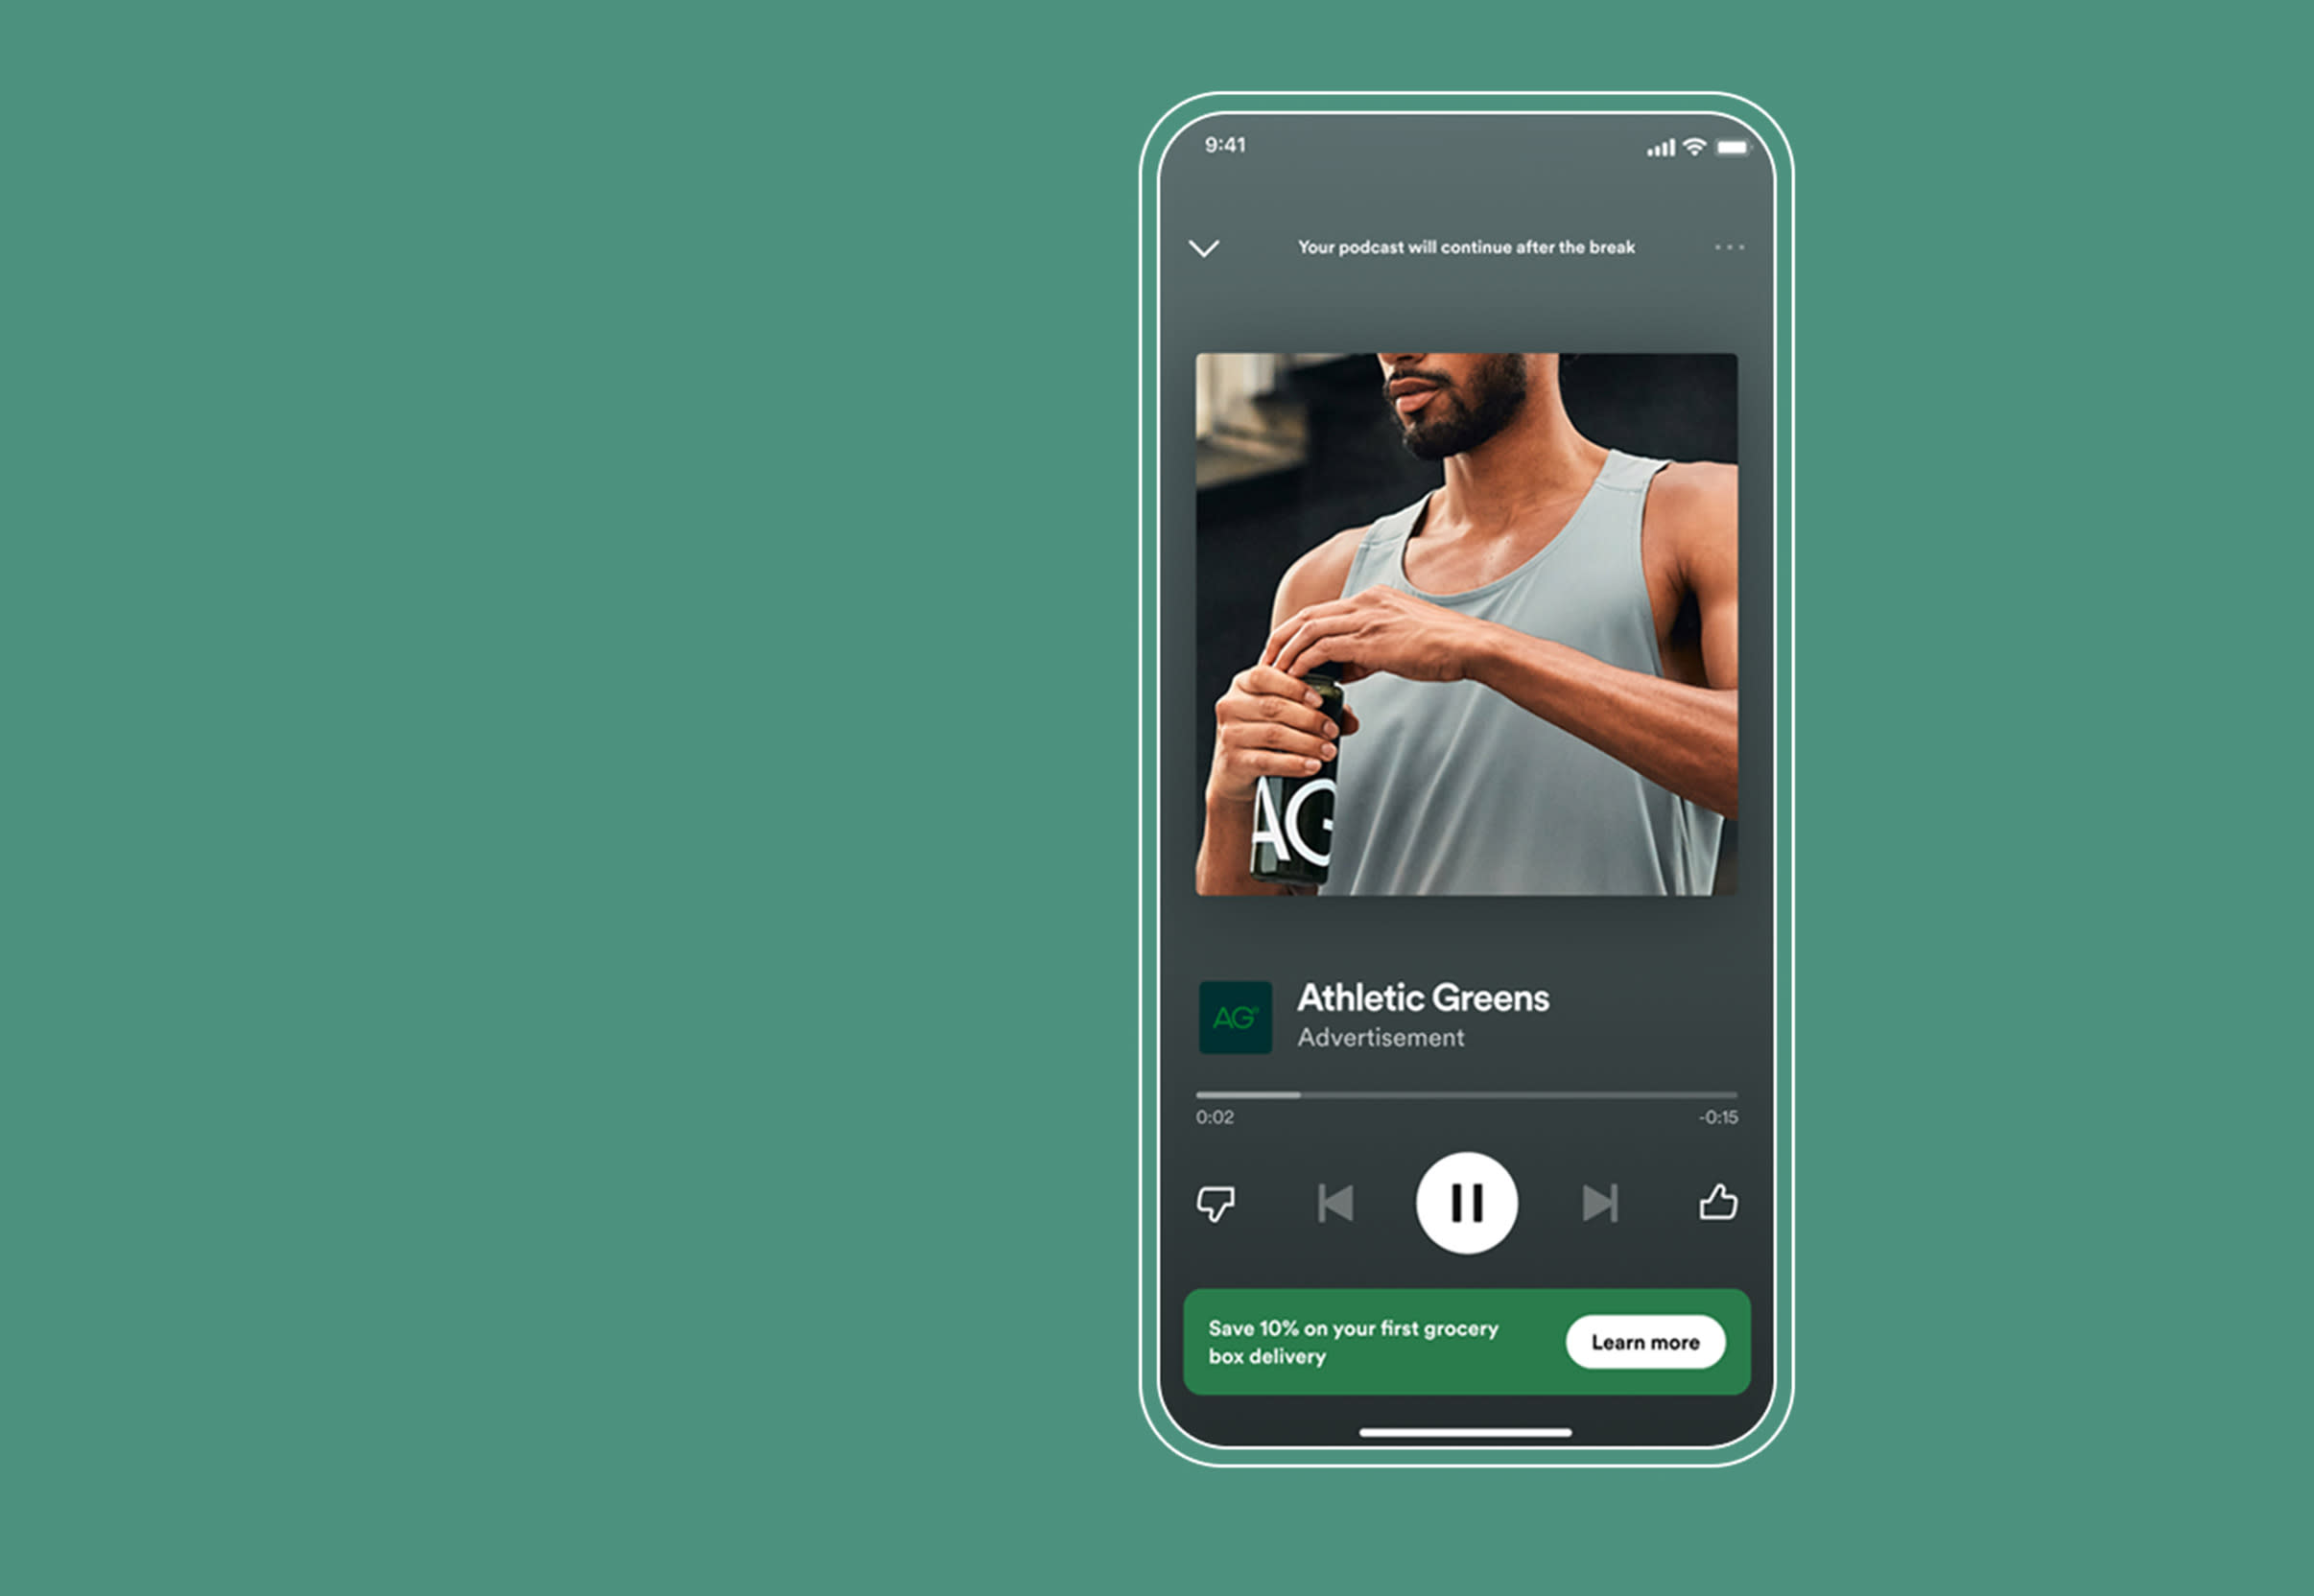 Spotify tripled the number of podcasts on the platform in a year